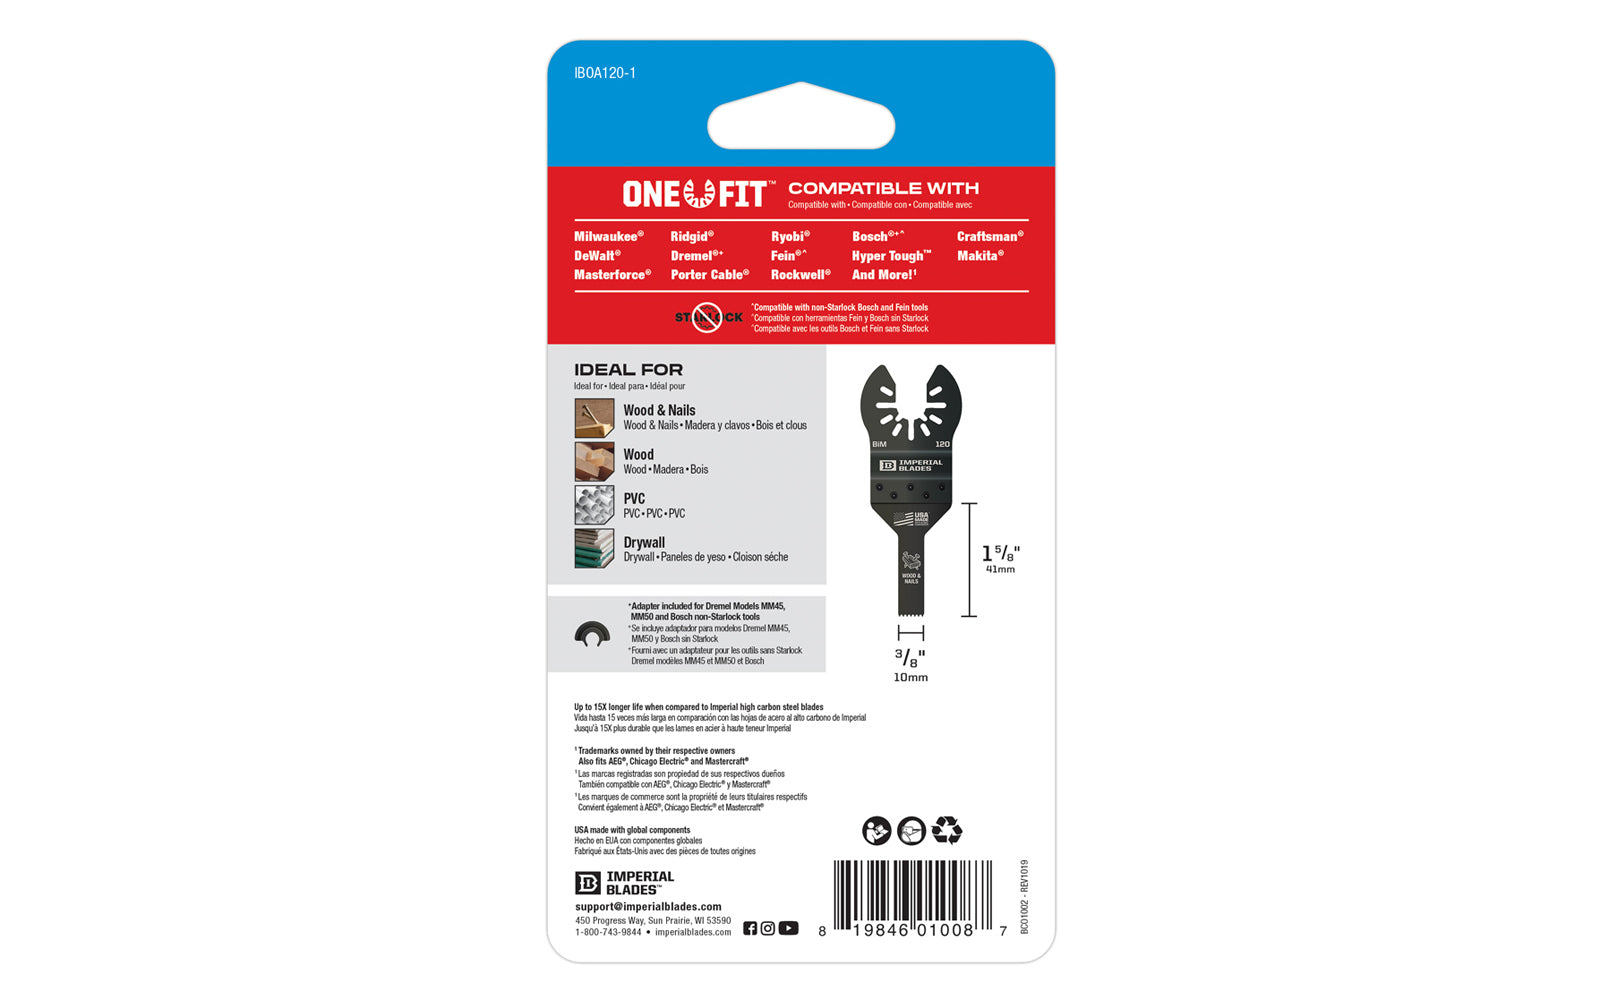 Imperial Blades "One Fit" 3/8" Fine Detail Wood Blade is a Bimetal blade with teeth set for Wood & Nails, Wood, PVC, Drywall. This fine tooth configuration is specifically designed for precise, clean cuts in soft materials. Blade Width: 3/8 (10 mm). Blade Depth: 1-5/8" (41 mm). Fine Detail Wood Blade - BiM blade